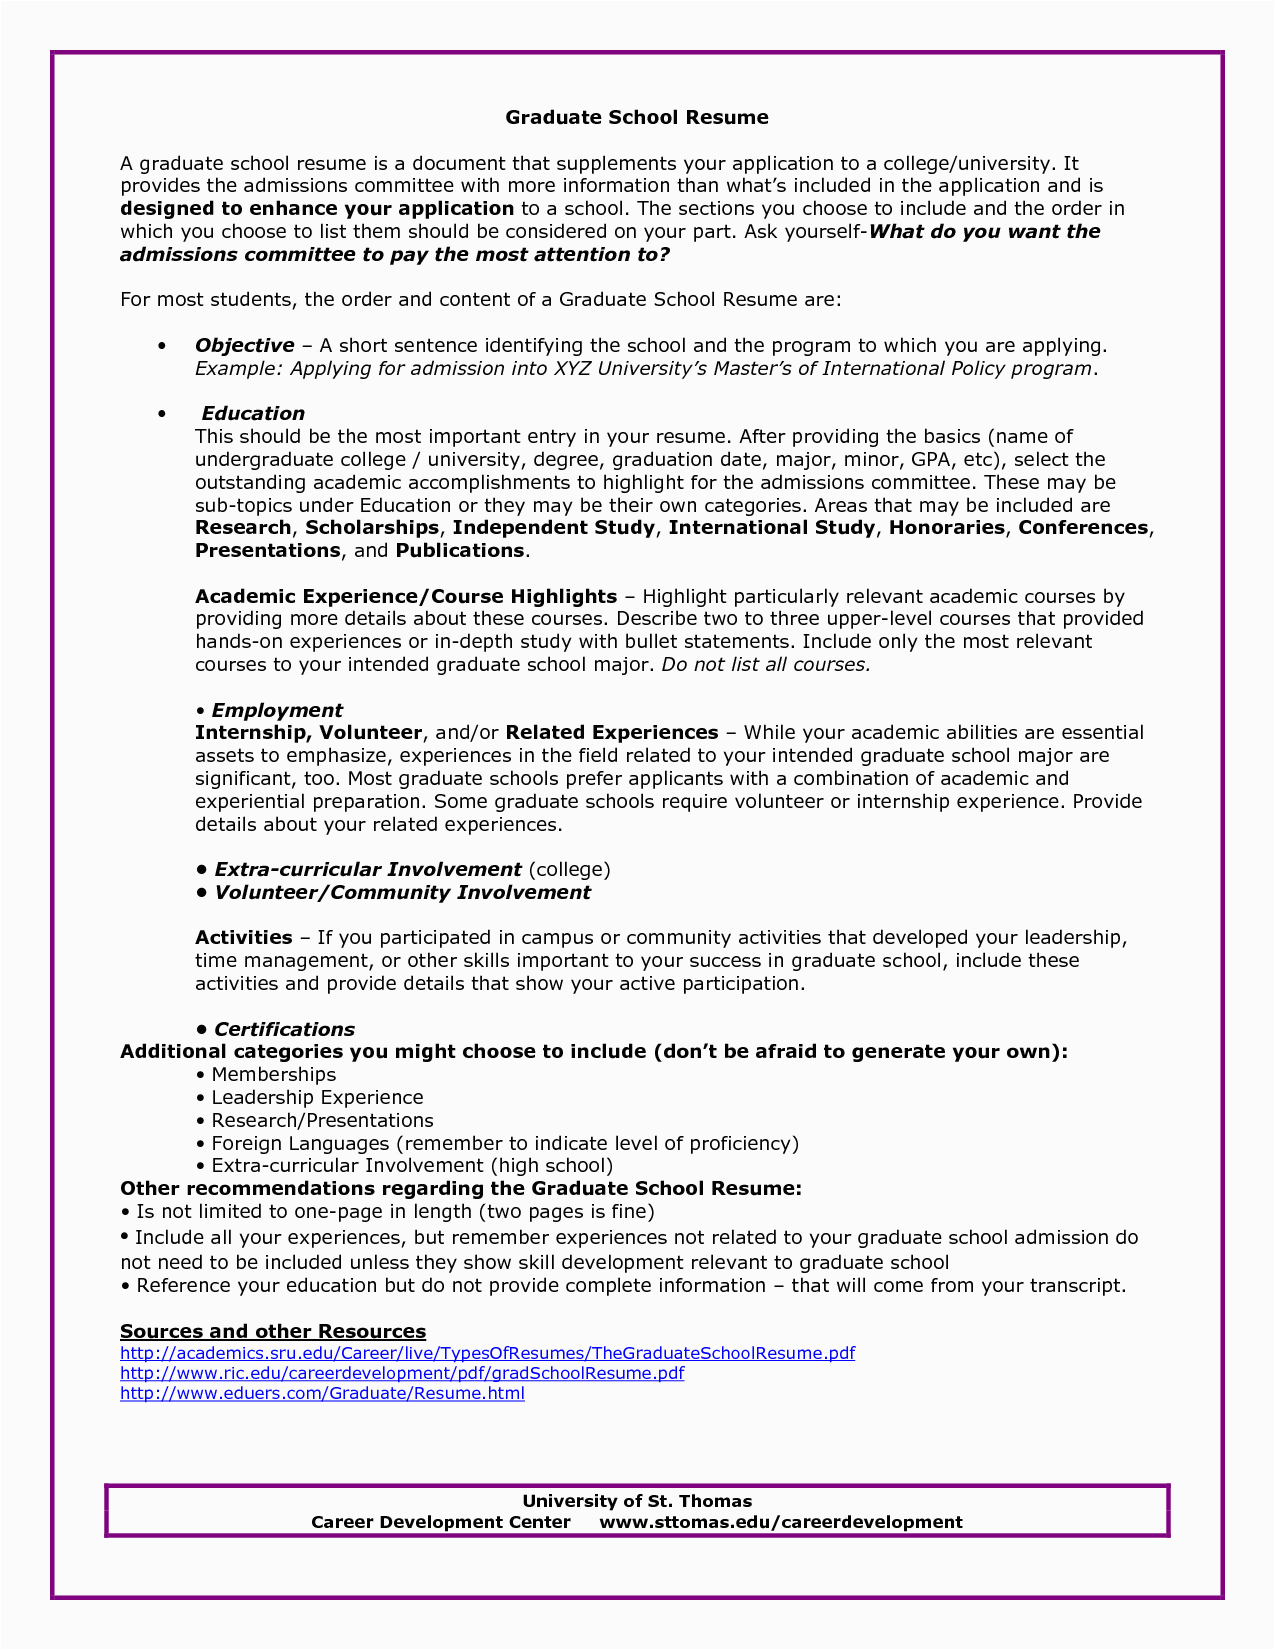 Resume Samples for Admission to Graduate School Graduate School Admissions Resume Sample O